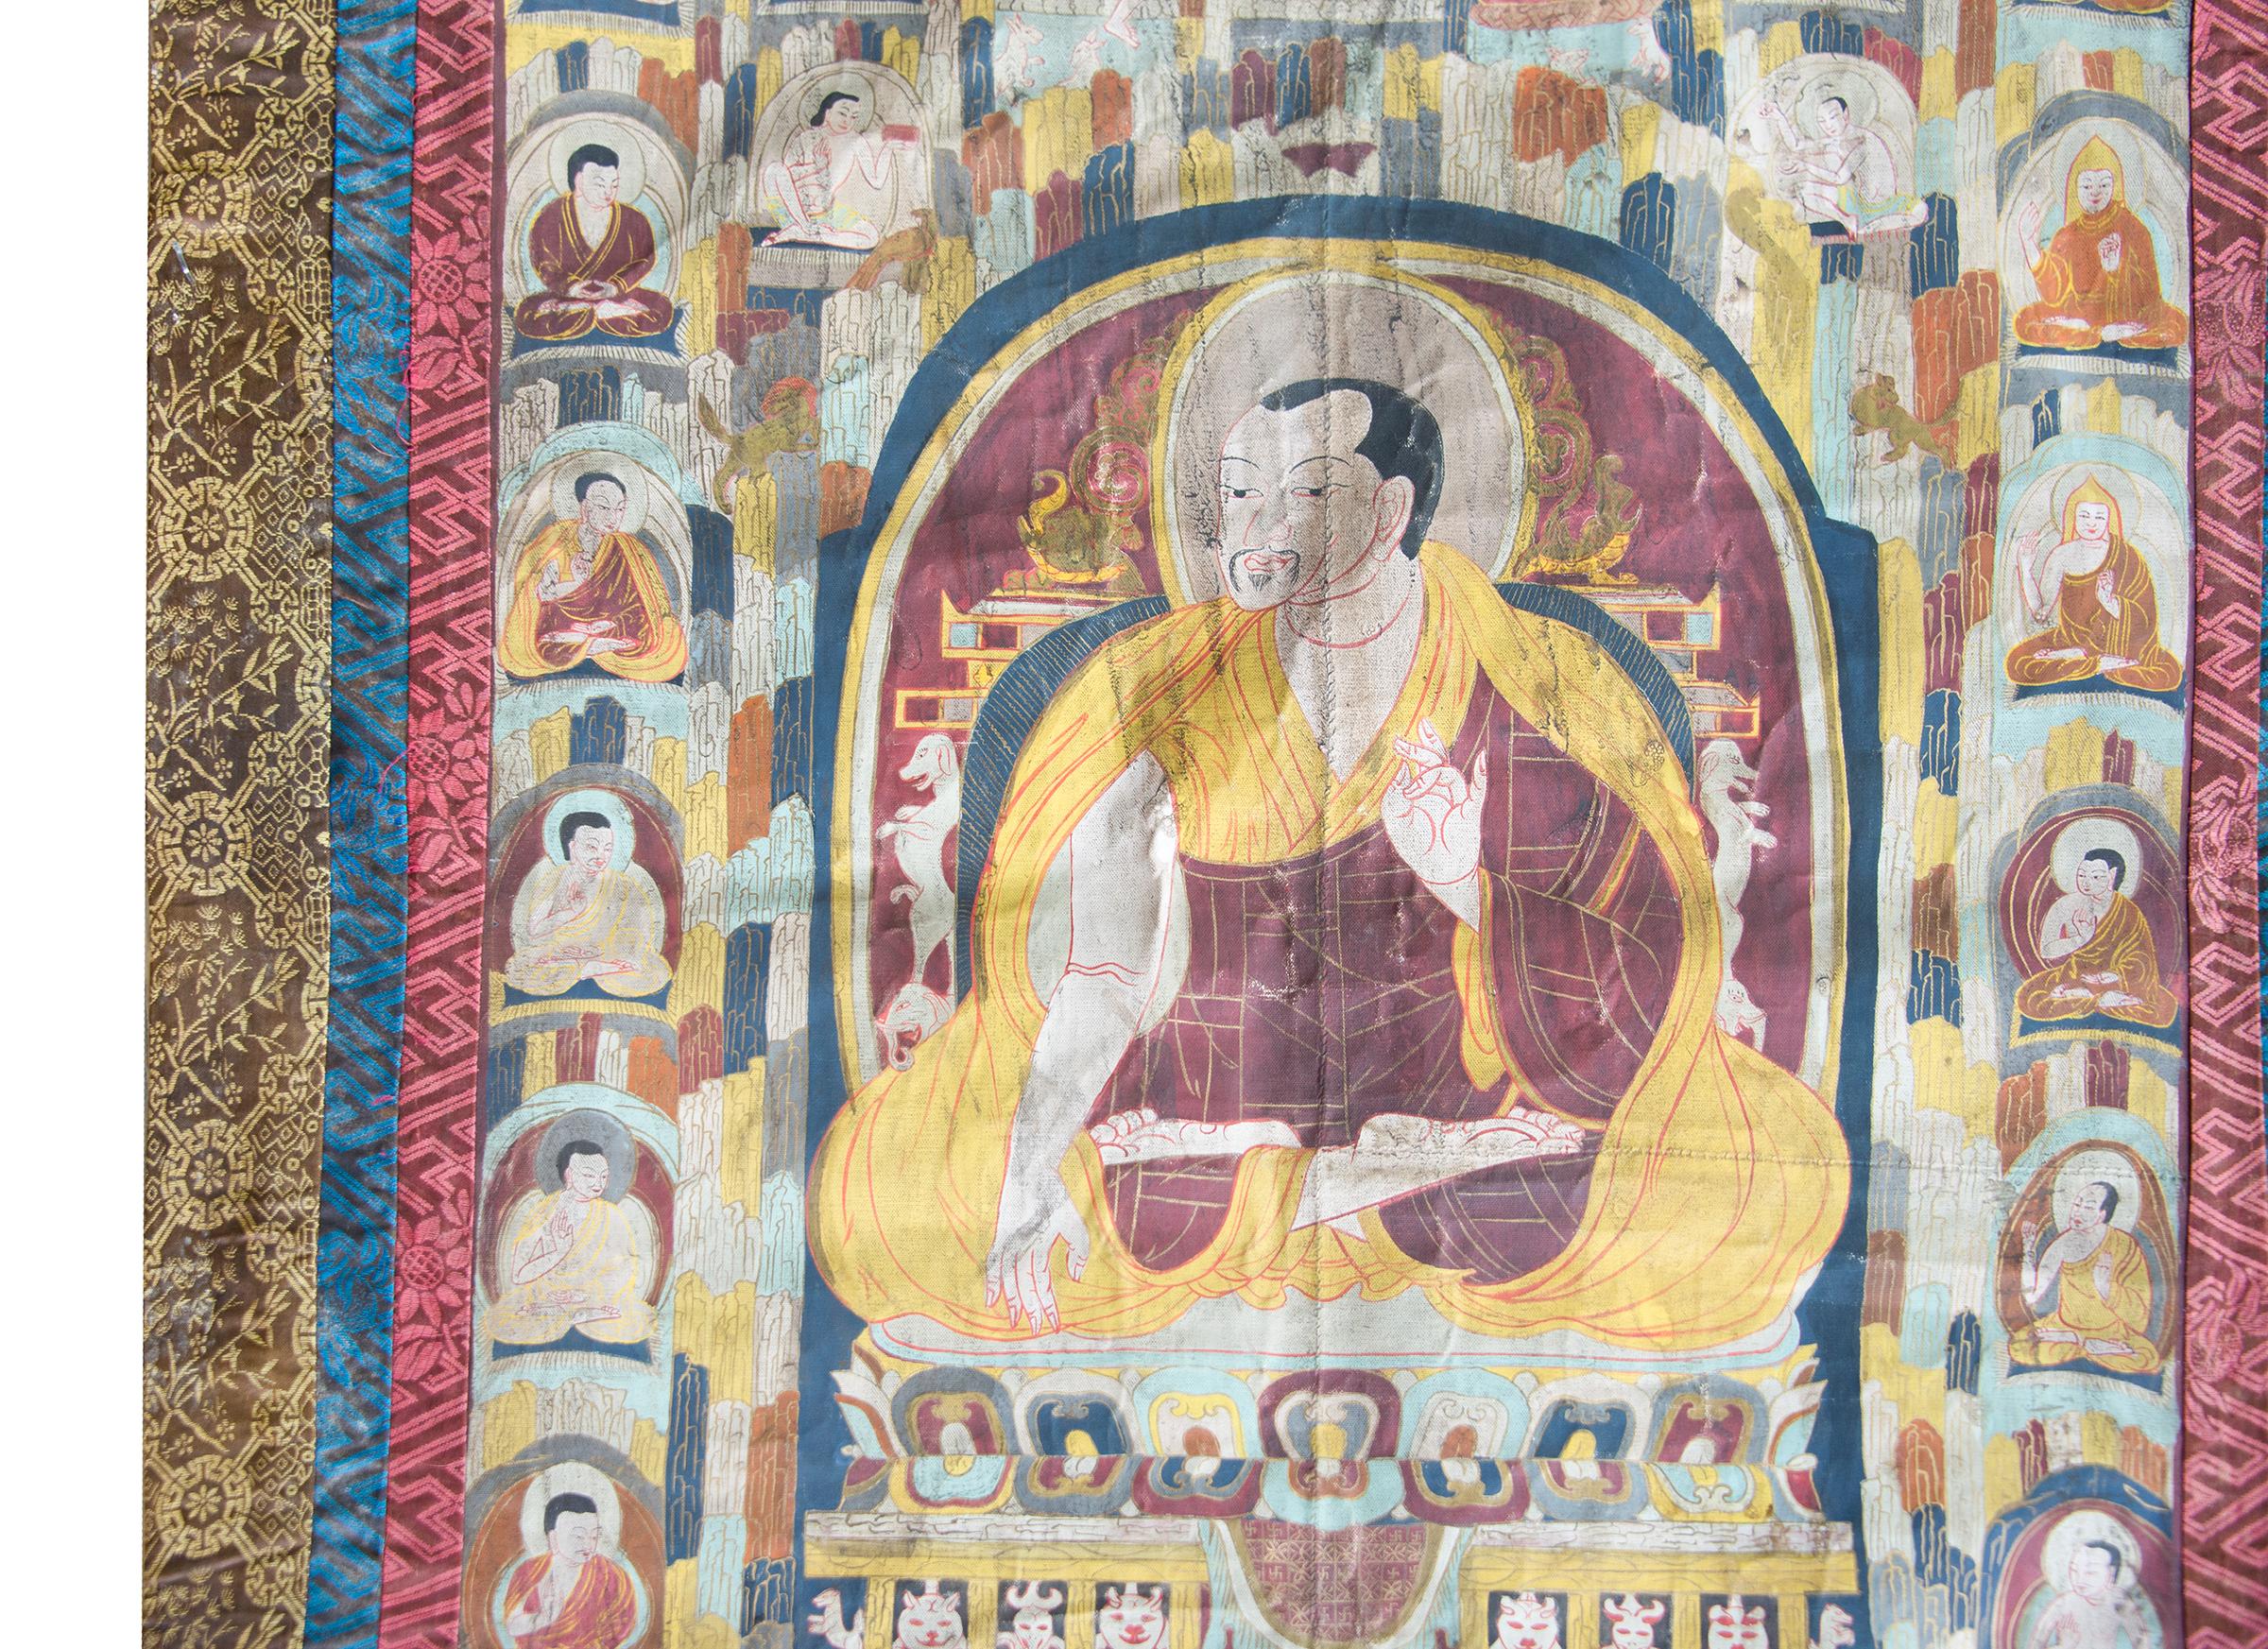 A wonderful late 19th century Tibetan Thangka depicting a portrait of a seated monk. Wearing the robes of a Tibetan Buddhist monk, the individual depicted in this portrait was probably a teacher of the Kadampa order. The painting’s patron, perhaps a